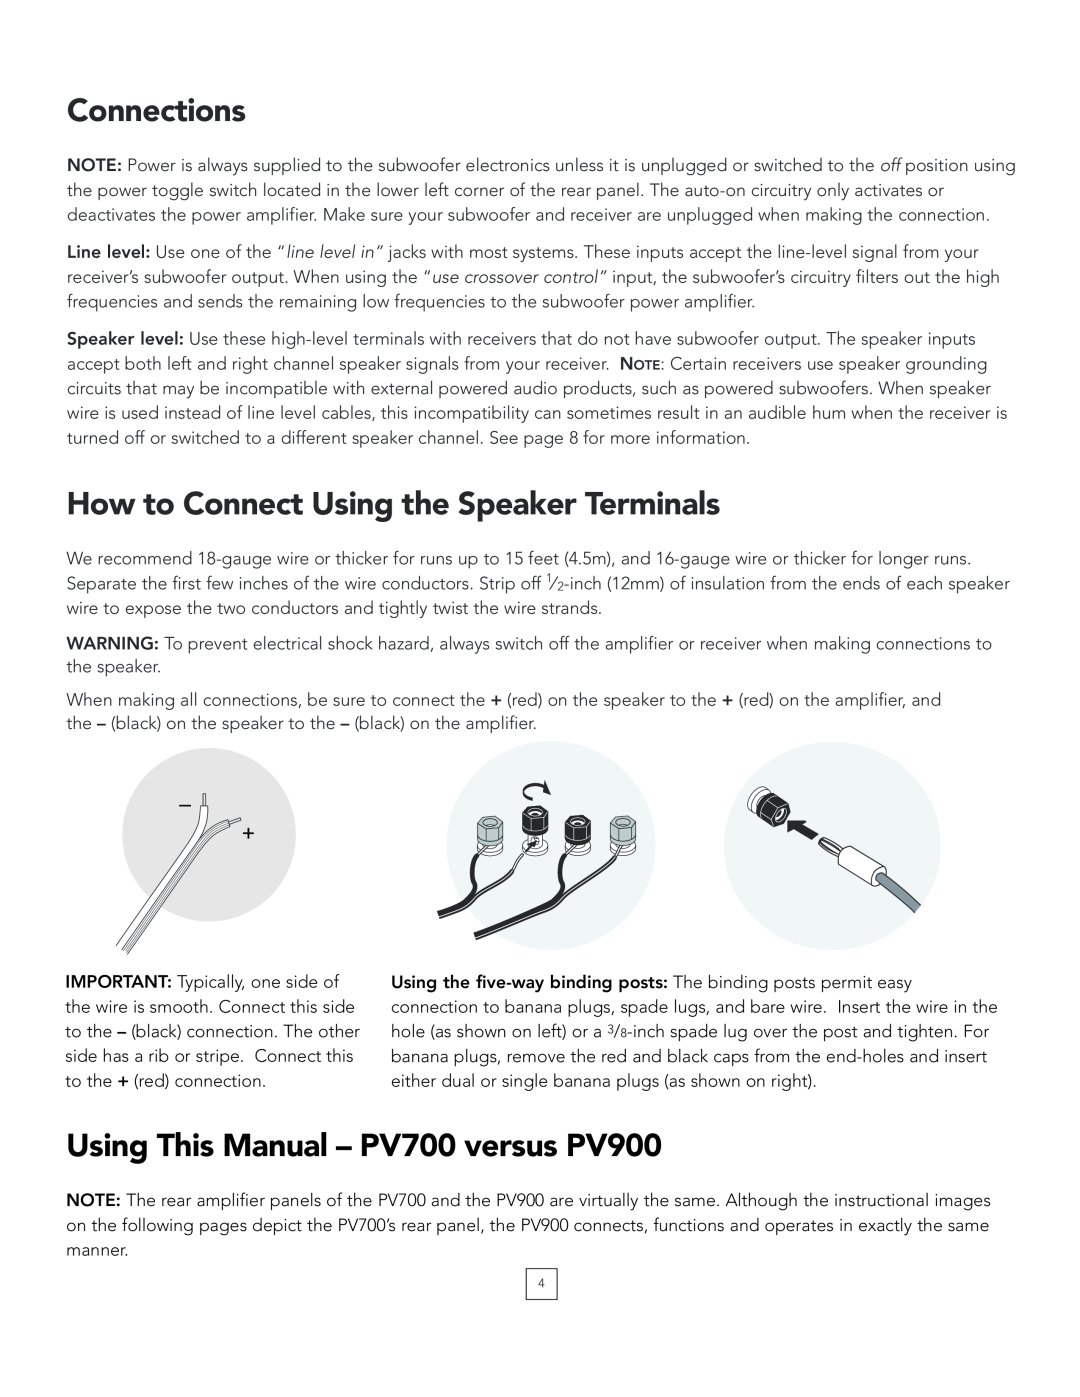 Boston Acoustics manual Connections, How to Connect Using the Speaker Terminals, Using This Manual - PV700 versus PV900 